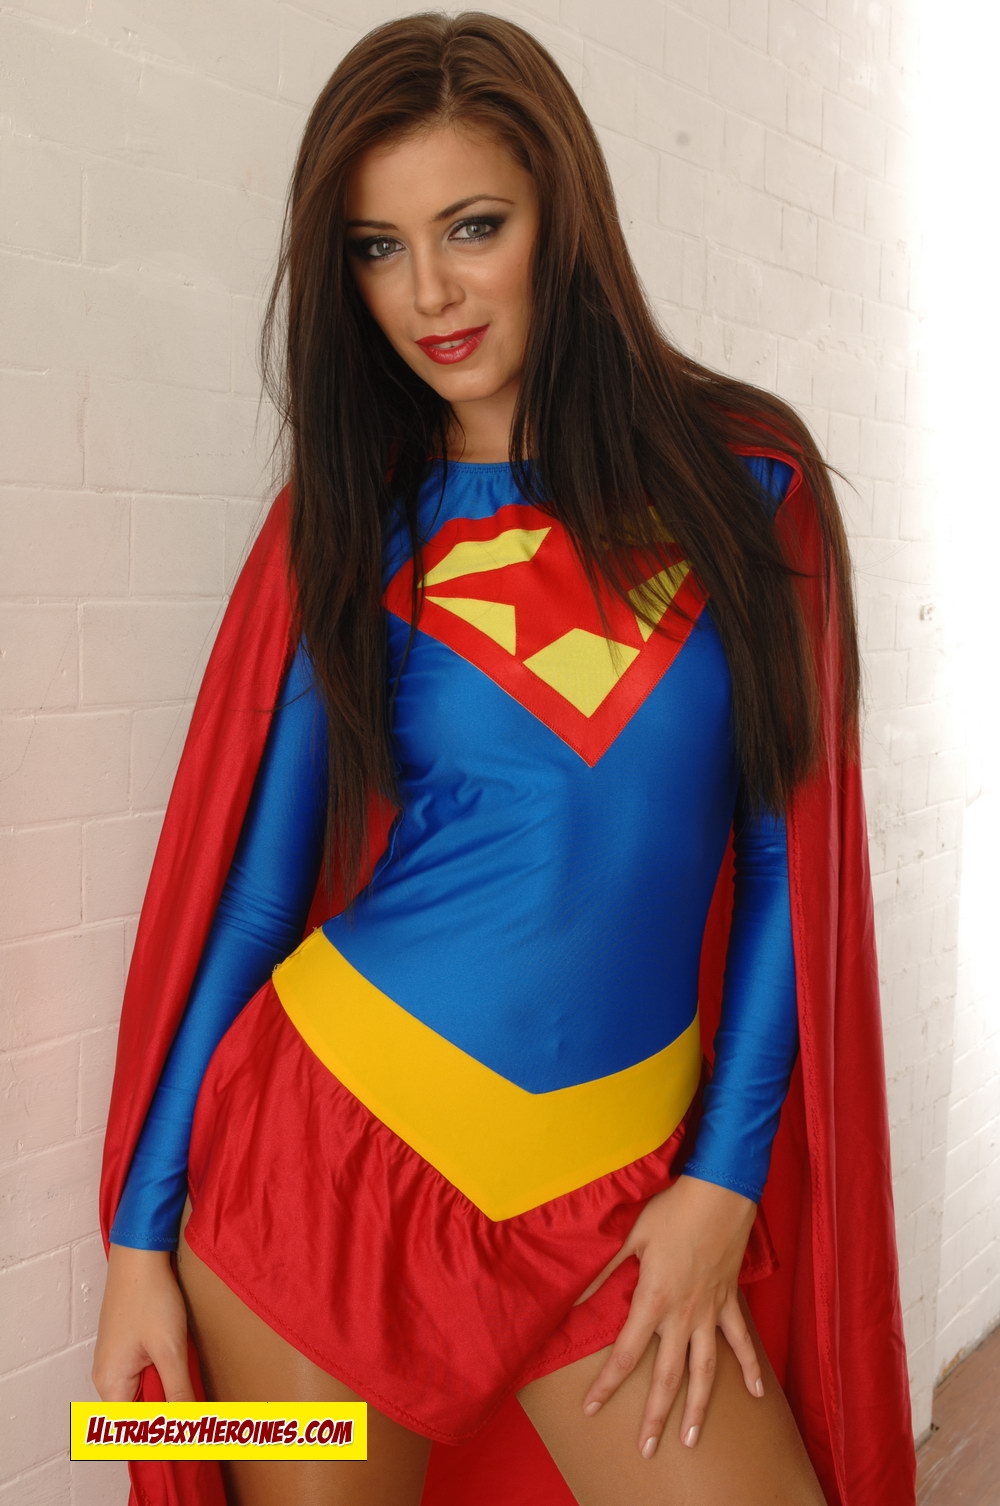 [UltraSexyHeroines] Super Heroine Cosplay Nude - Holly 83